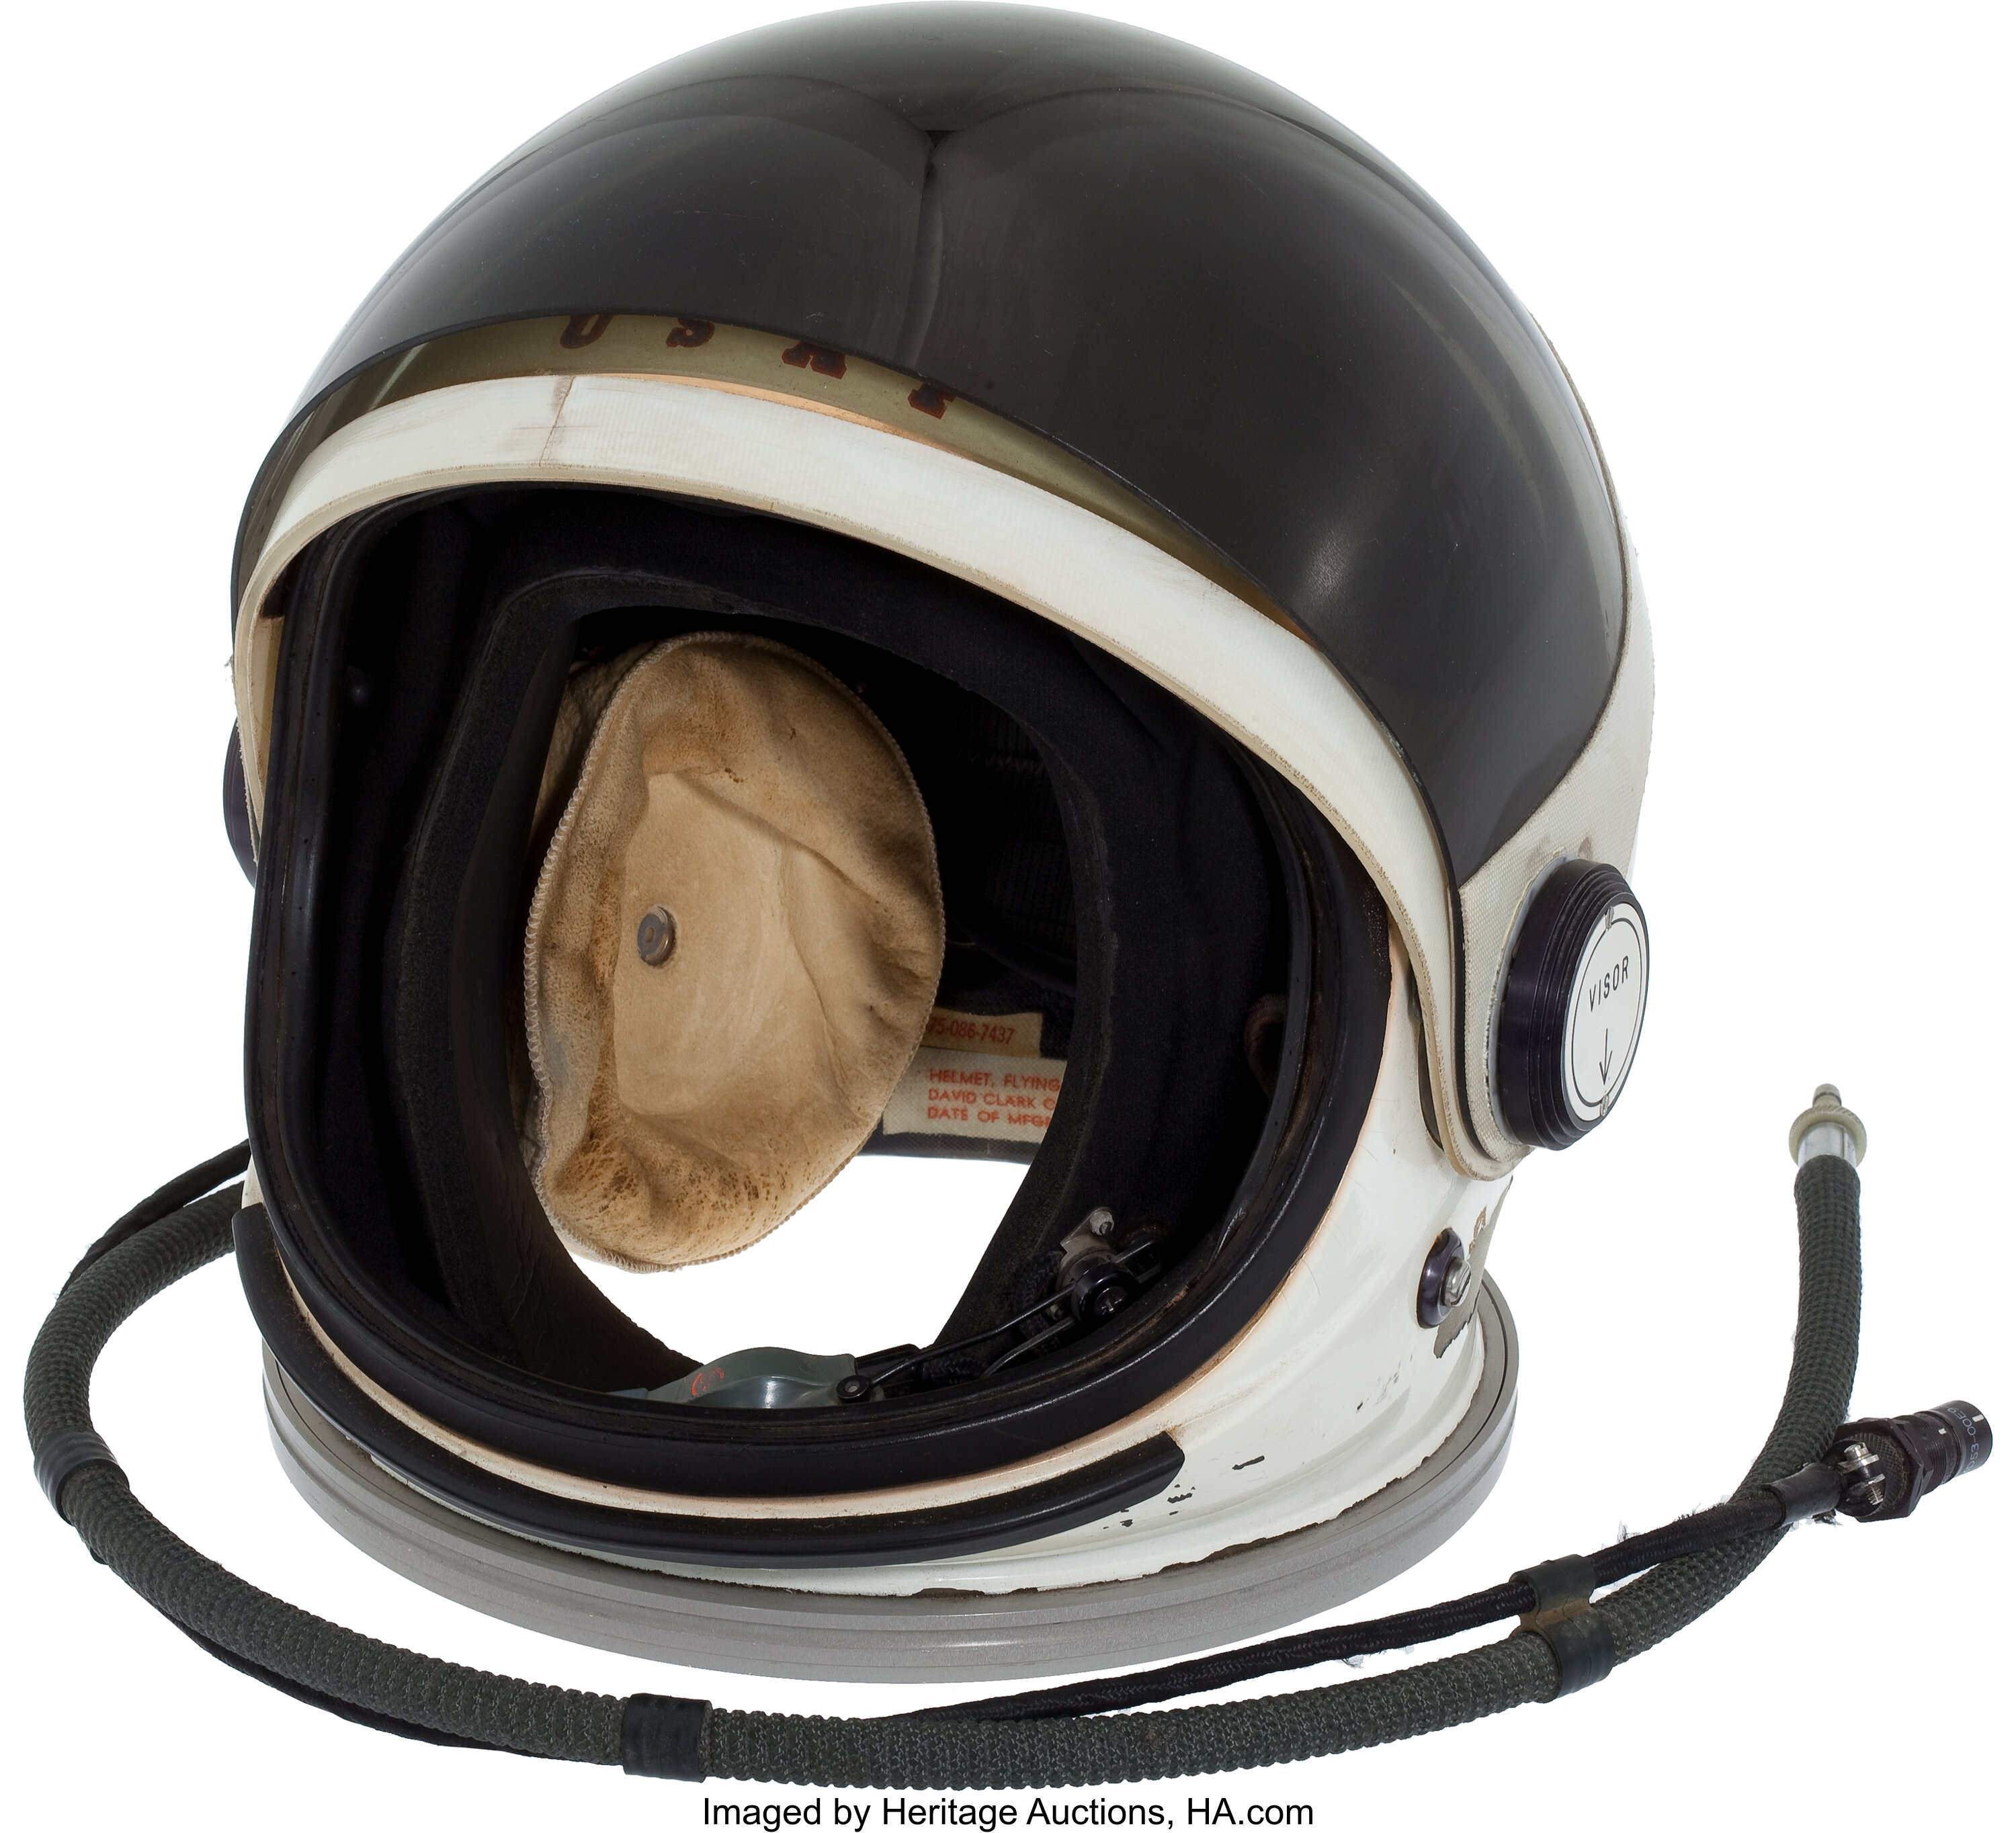 Air Force Hgk 13 Full Pressure Helmet As Used In The X 15 Lot Heritage Auctions